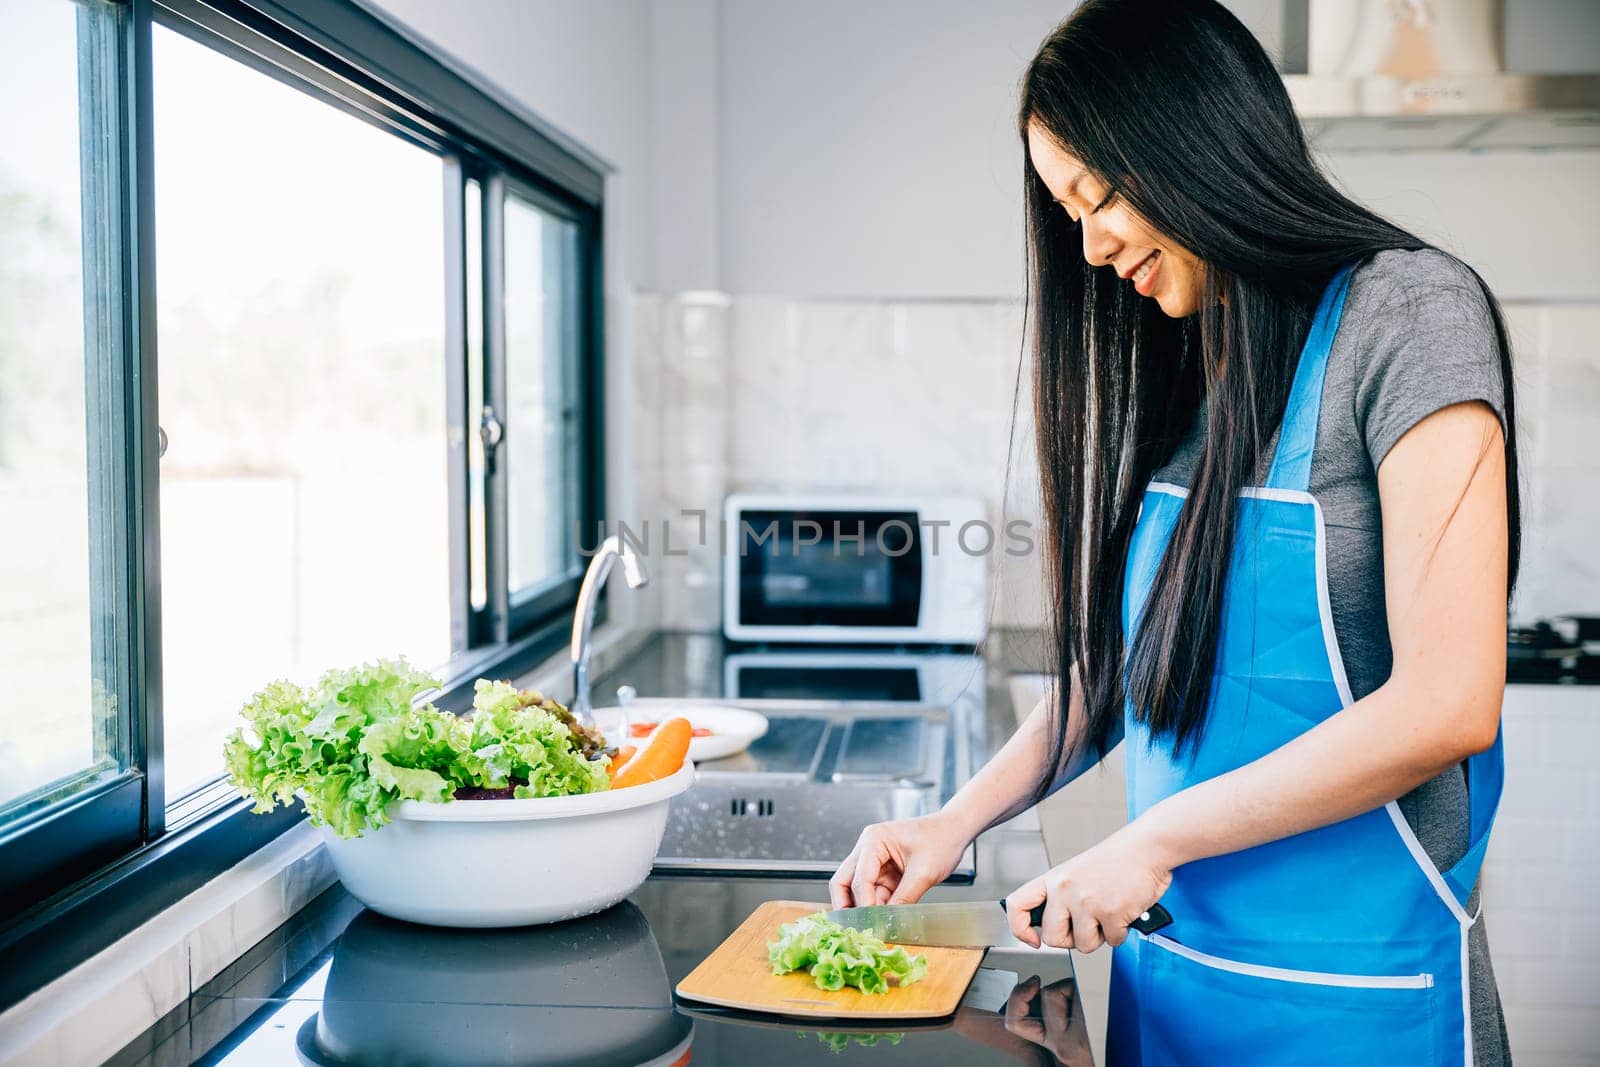 Close-up of a smiling woman in an apron cutting vegetables for a healthy salad. Emphasizing the housewife's preparation of a nutritious family meal in the kitchen.